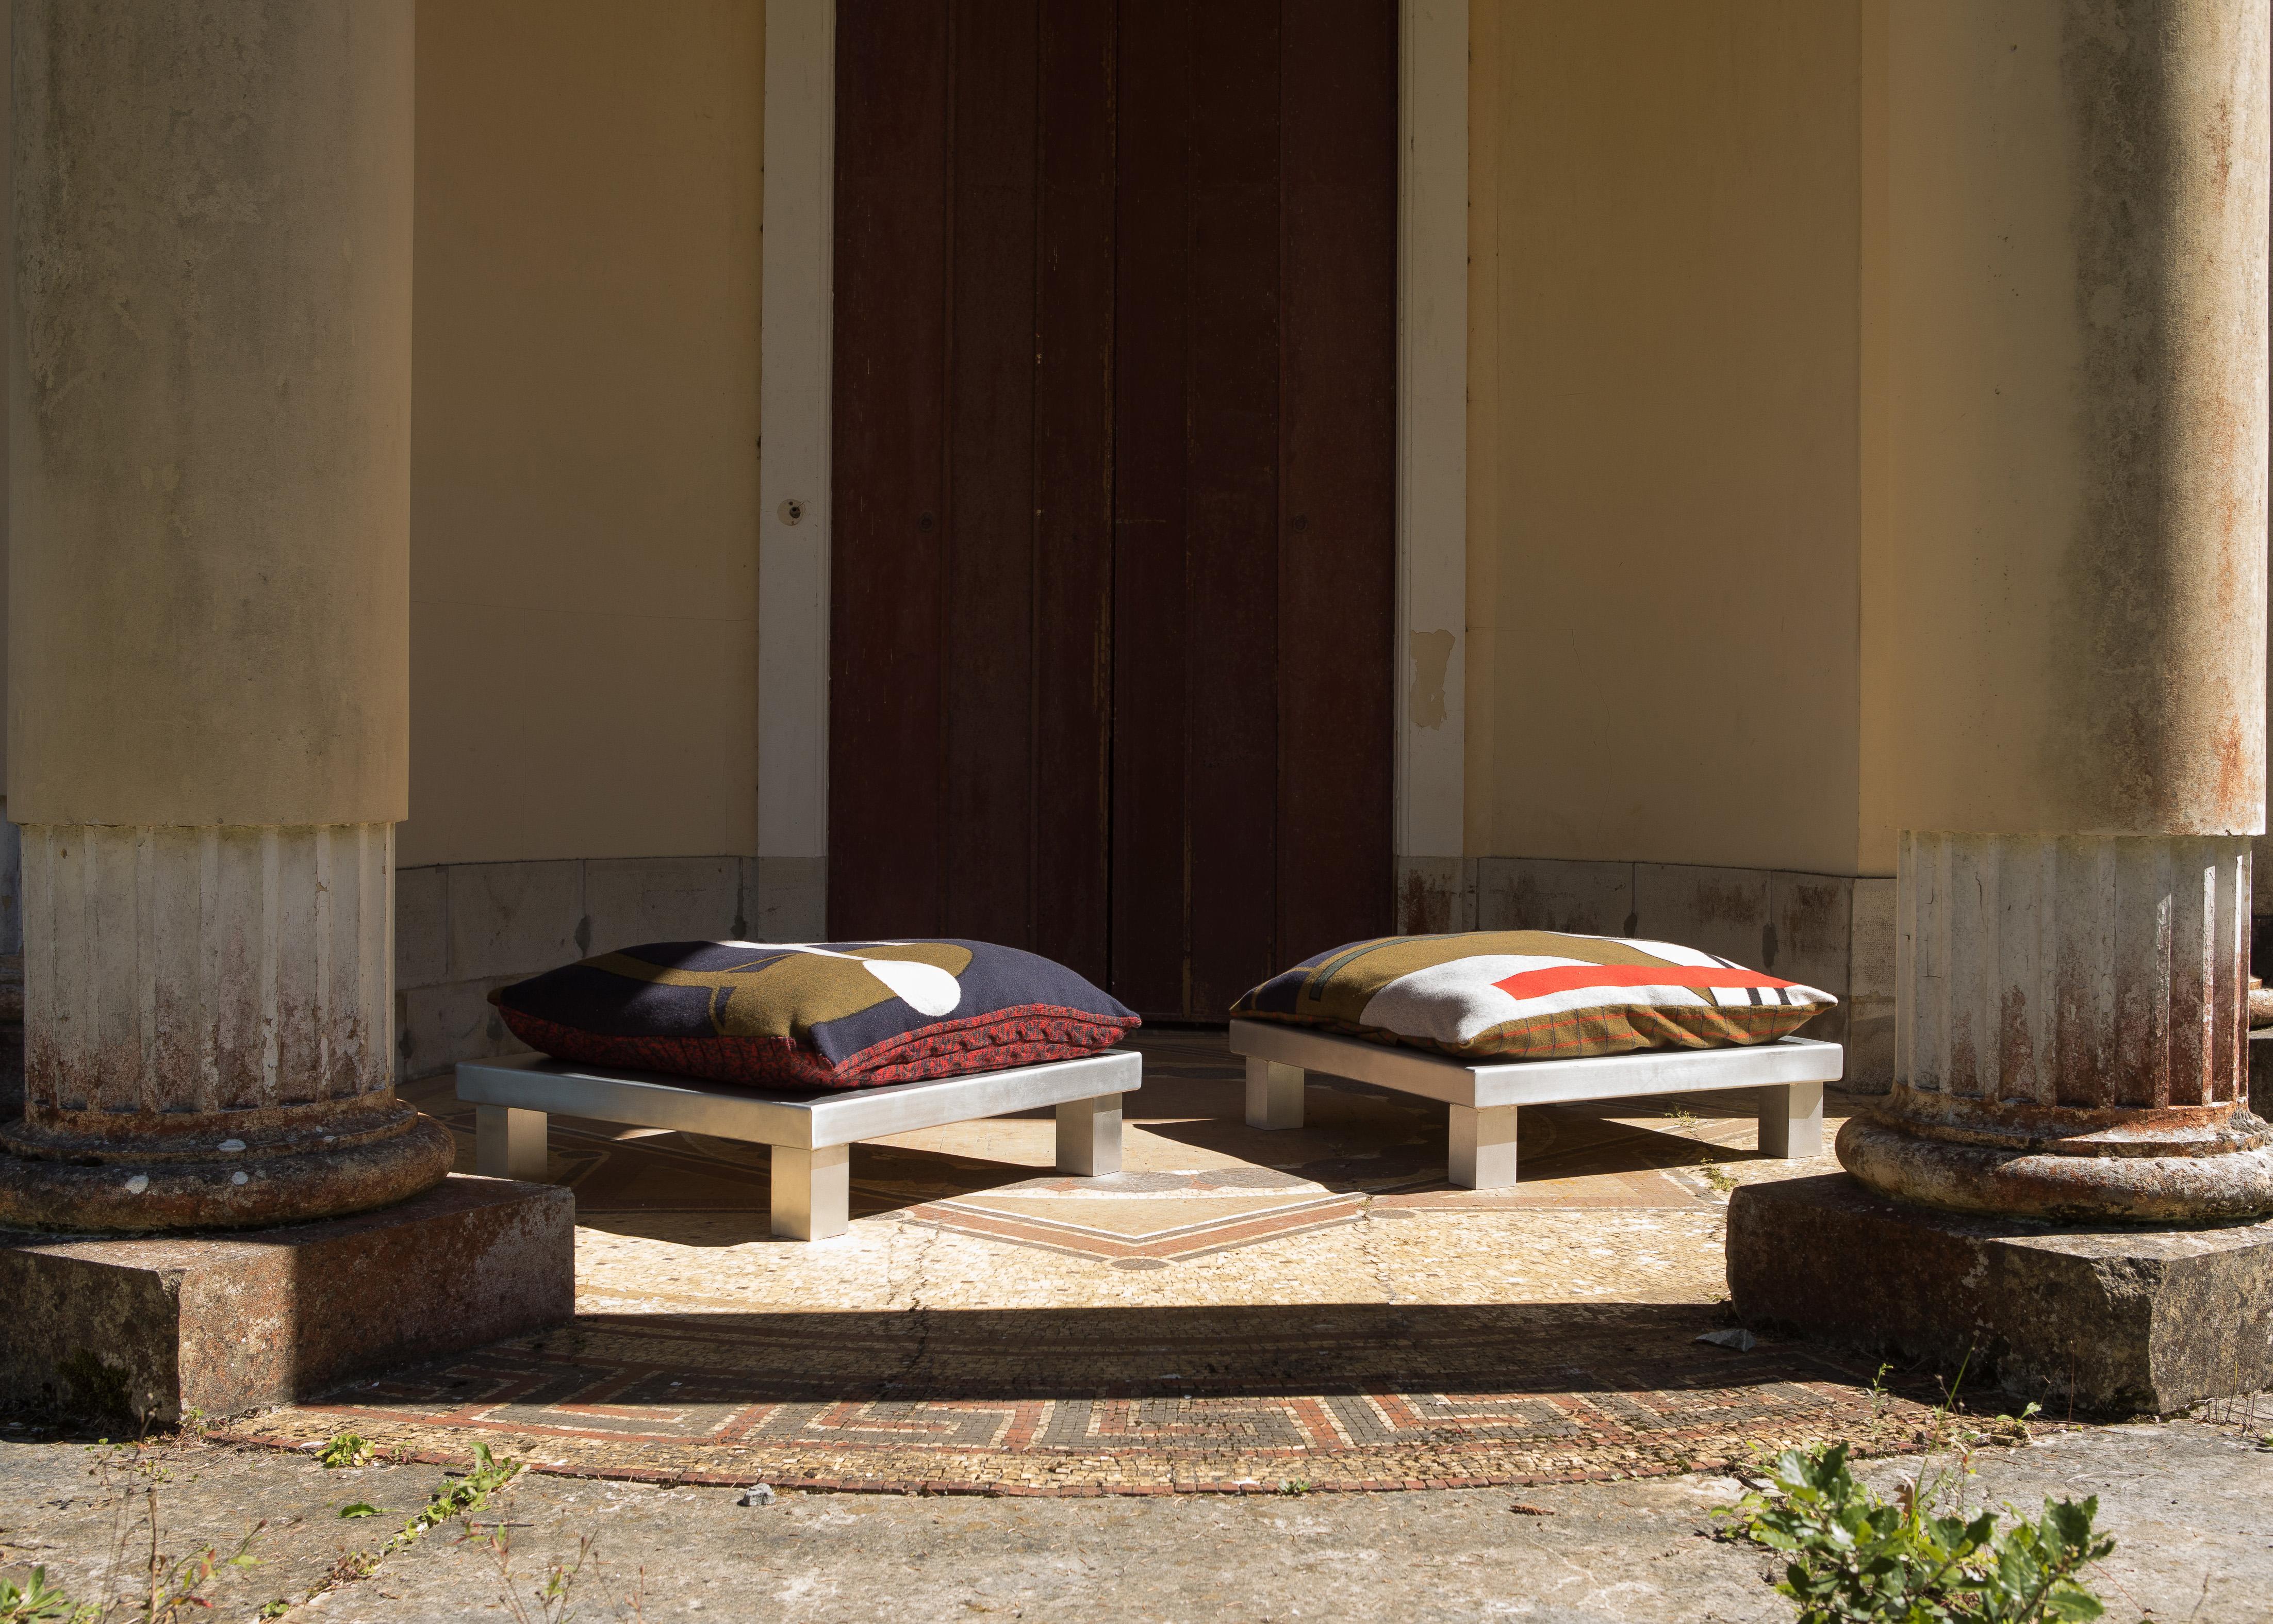 Set Of 2 Aluminum Day Beds by Mylene Niedzialkowski
Dimensions: D 80 x W 80 x H 20 cm. 
Materials: Aluminum. 

Two seats with straight aluminium. These can be complemented with a cushion in Italian wool knitted in the south of Milan. Cushions are